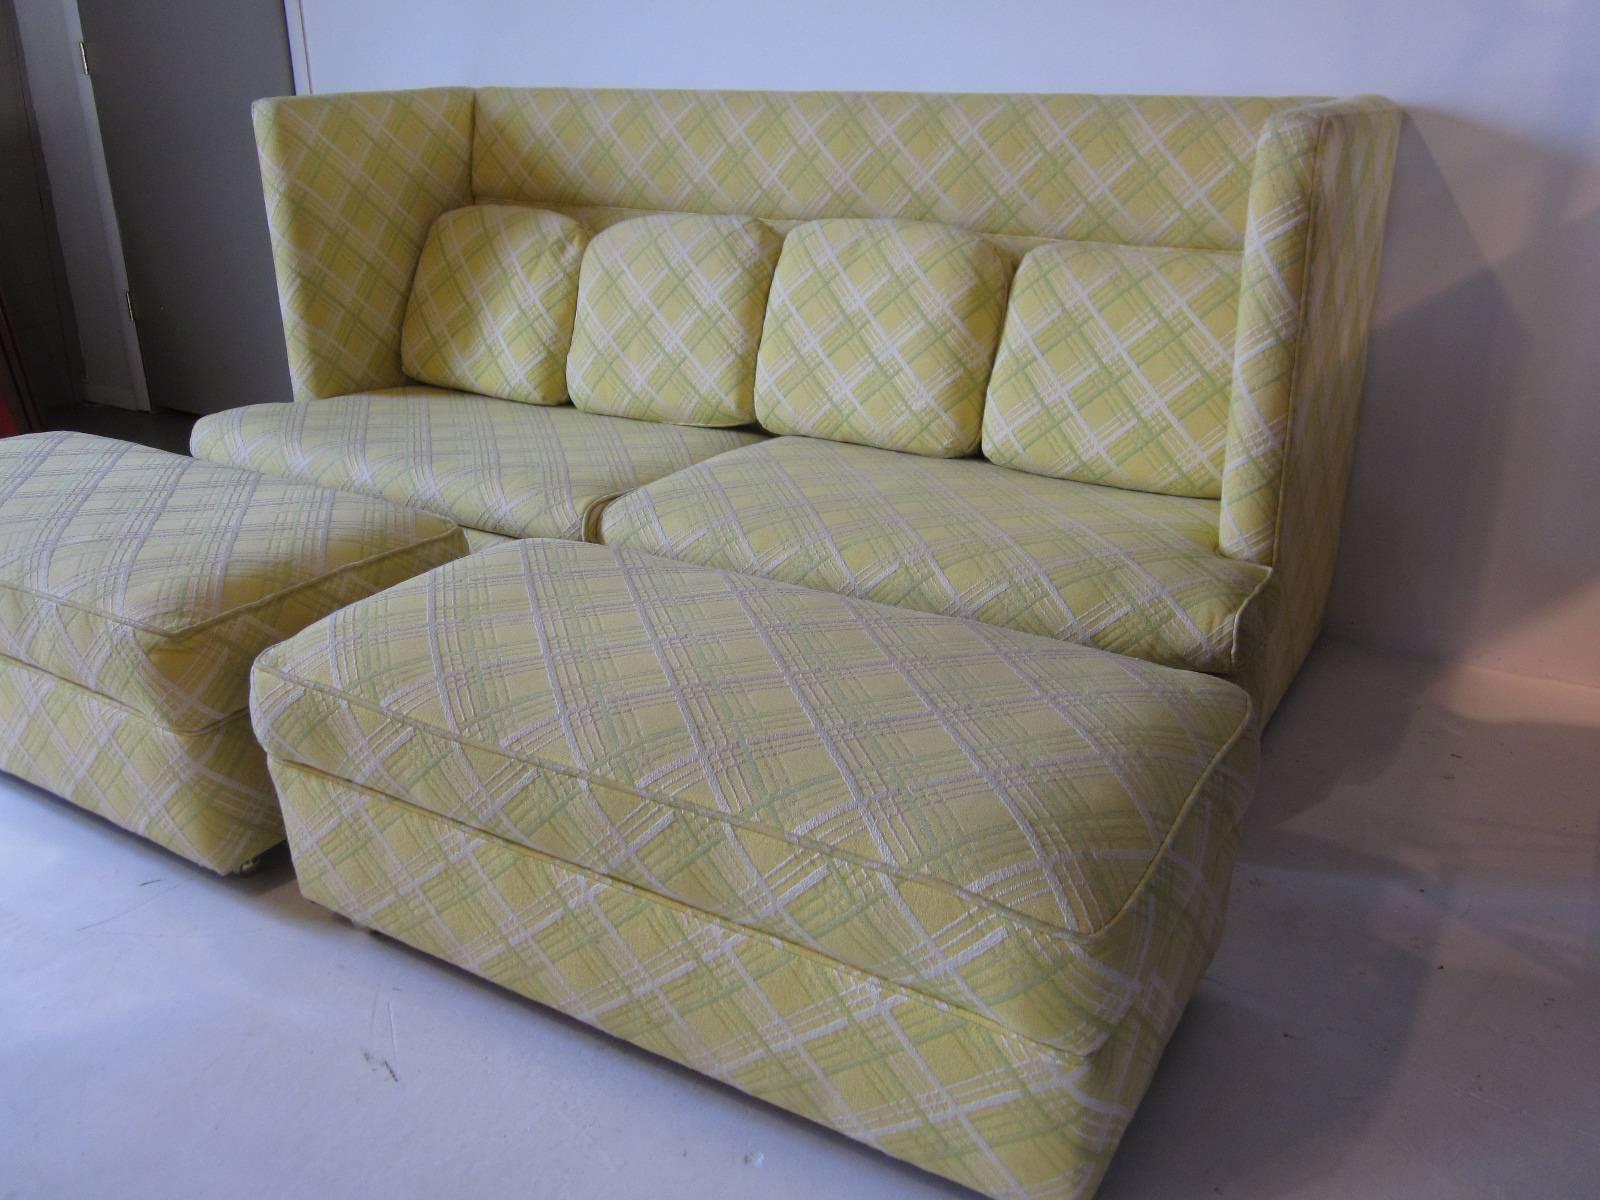 A rare Milo Baughman shelter sofa with four loose back cushions and two matching ottomans on casters. Reupholstered in the past with a celery, off-white and light butter tone in a criss cross pattern . Manufactured by the Thayer Coggin furniture